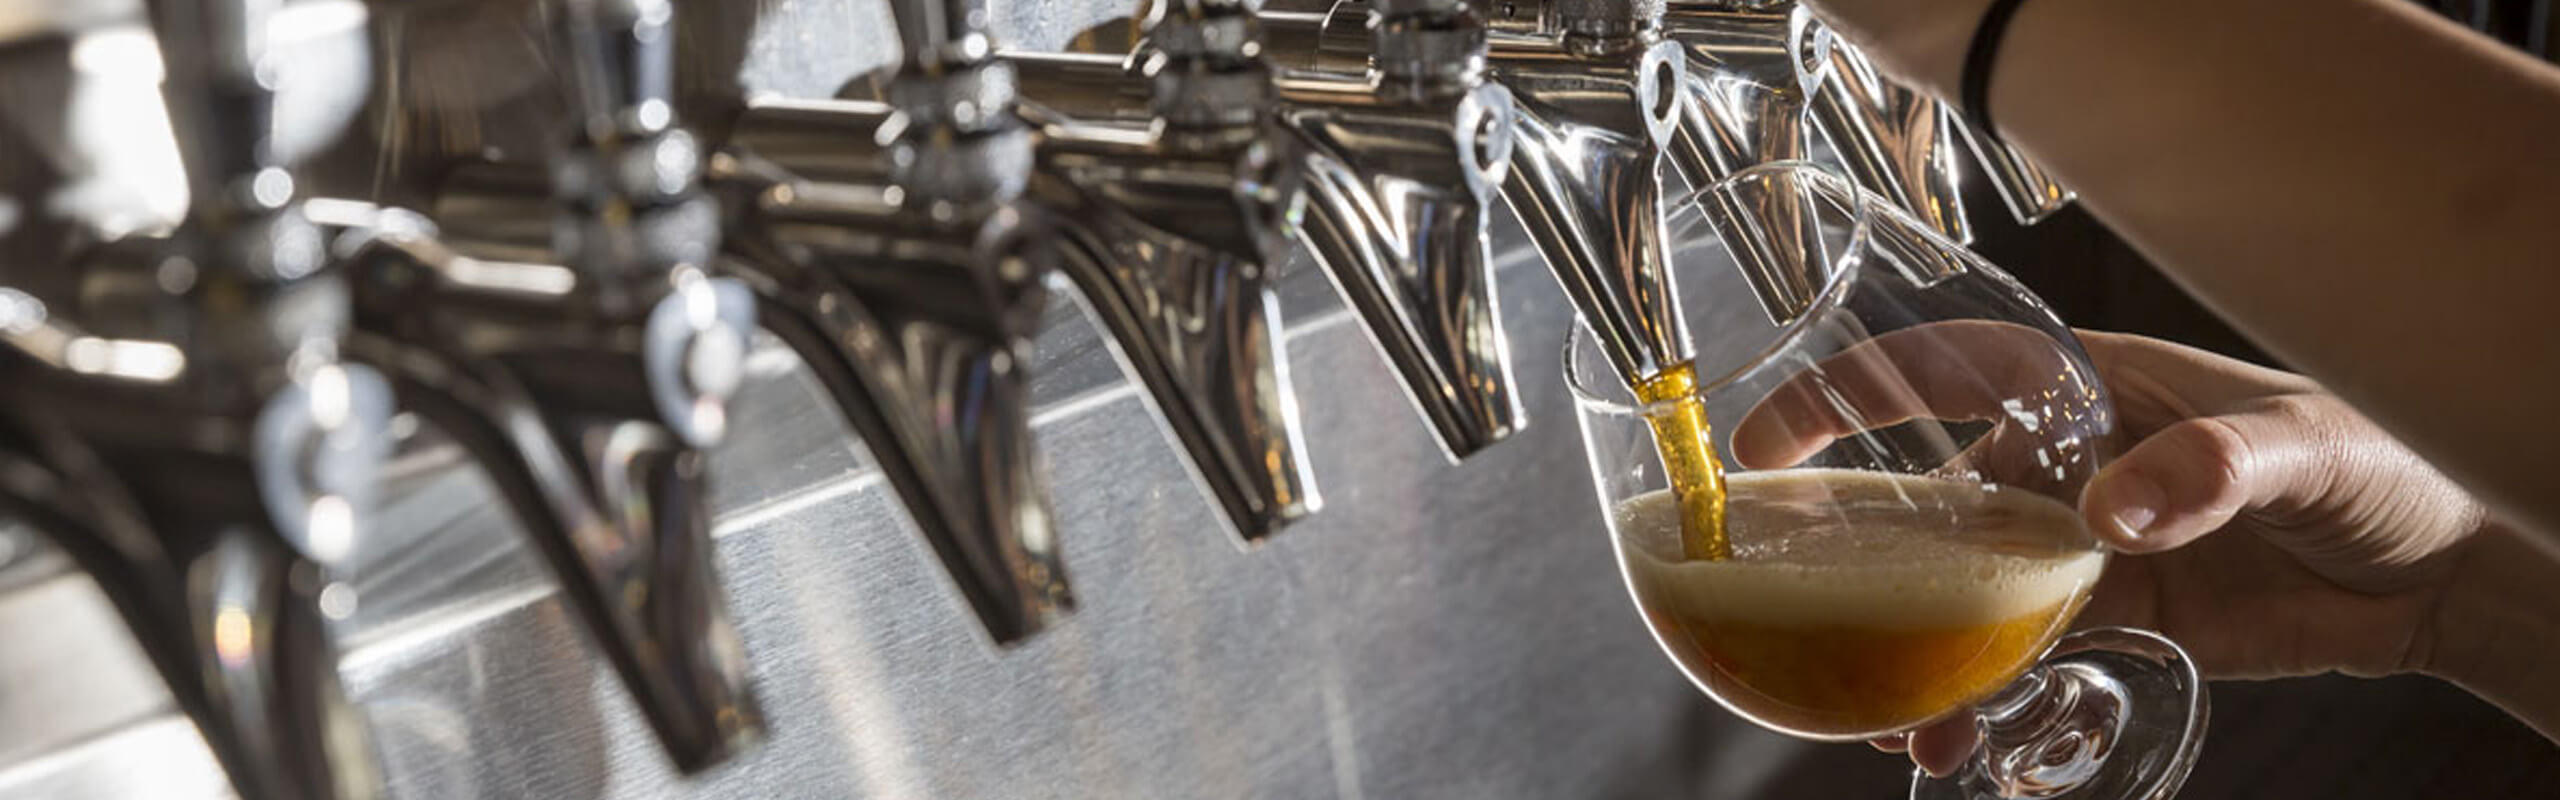 Row of tap handles and taps with one pouring beer into a snifter glass